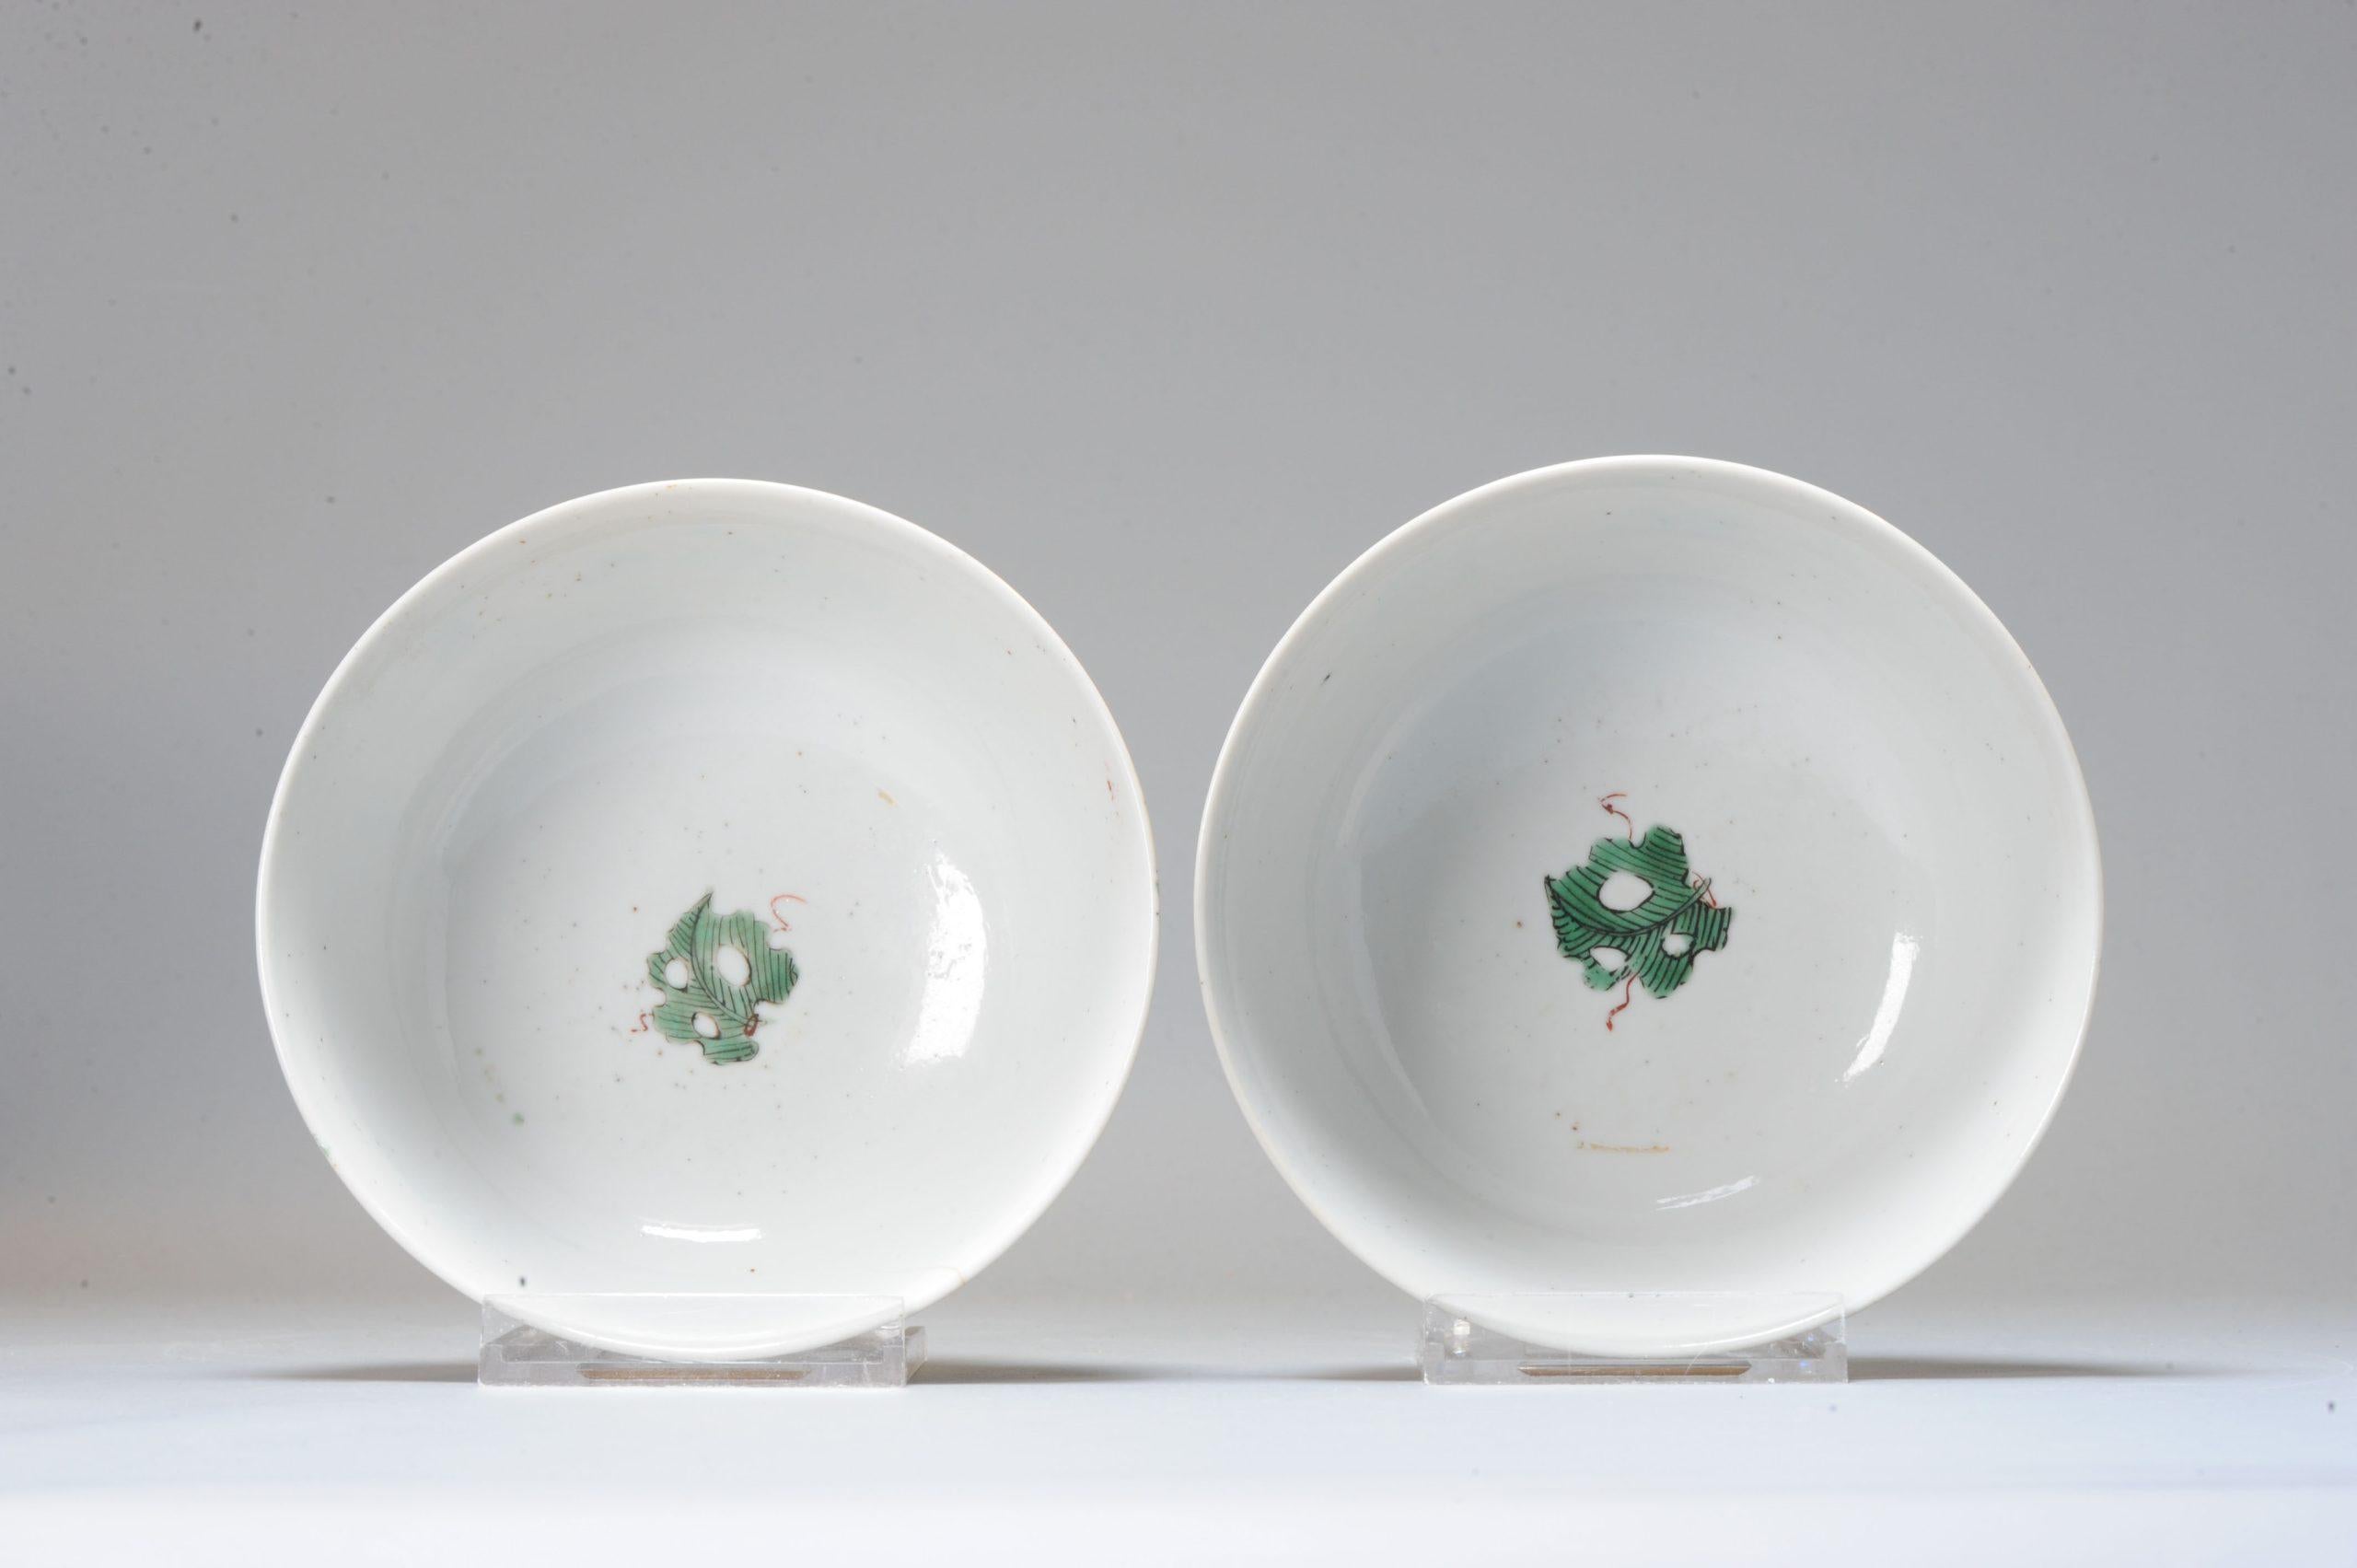 Very unusual pieces of Cafe au Lait porcelain. Lovely examples of the Kangxi period.

The bowl are white at the base and inside and cafe au lait of the outside wall. Painted are the The Eight Buddhist Emblems (Bajixiang) and also with a